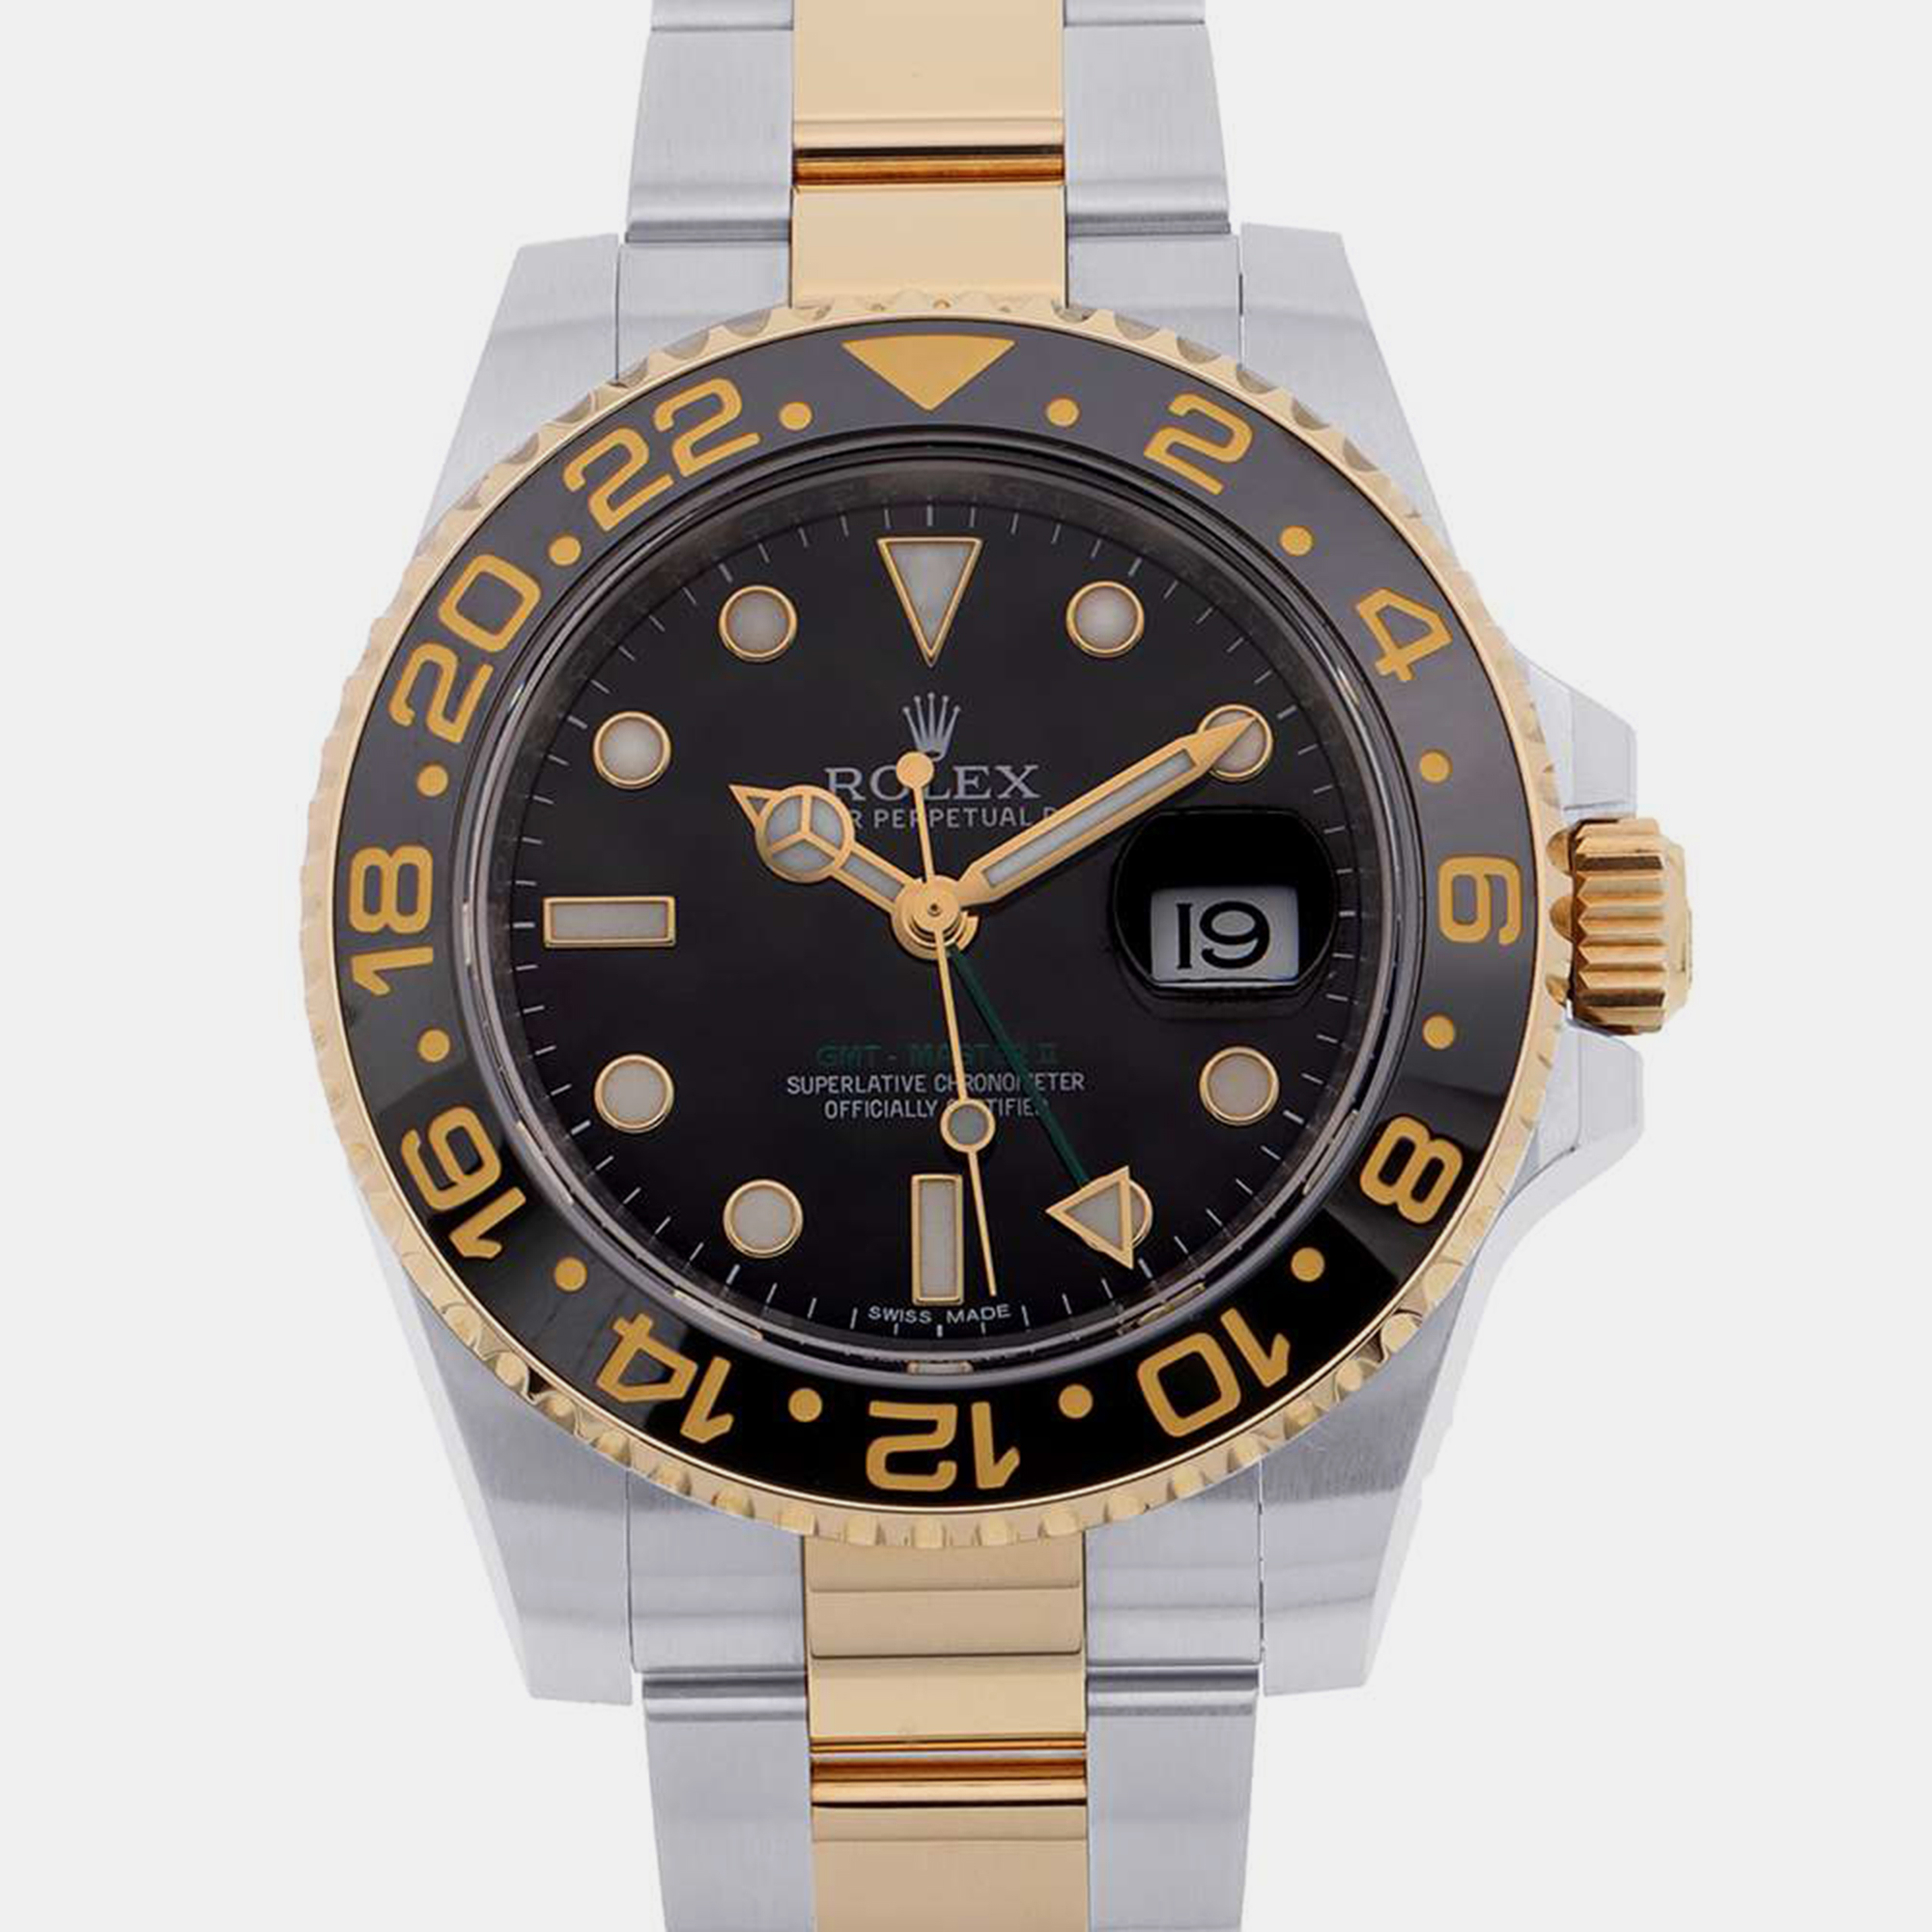 Rolex Black 18k Yellow Gold And Stainless Steel GMT-Master II 116713LN Automatic Men's Wristwatch 40 Mm